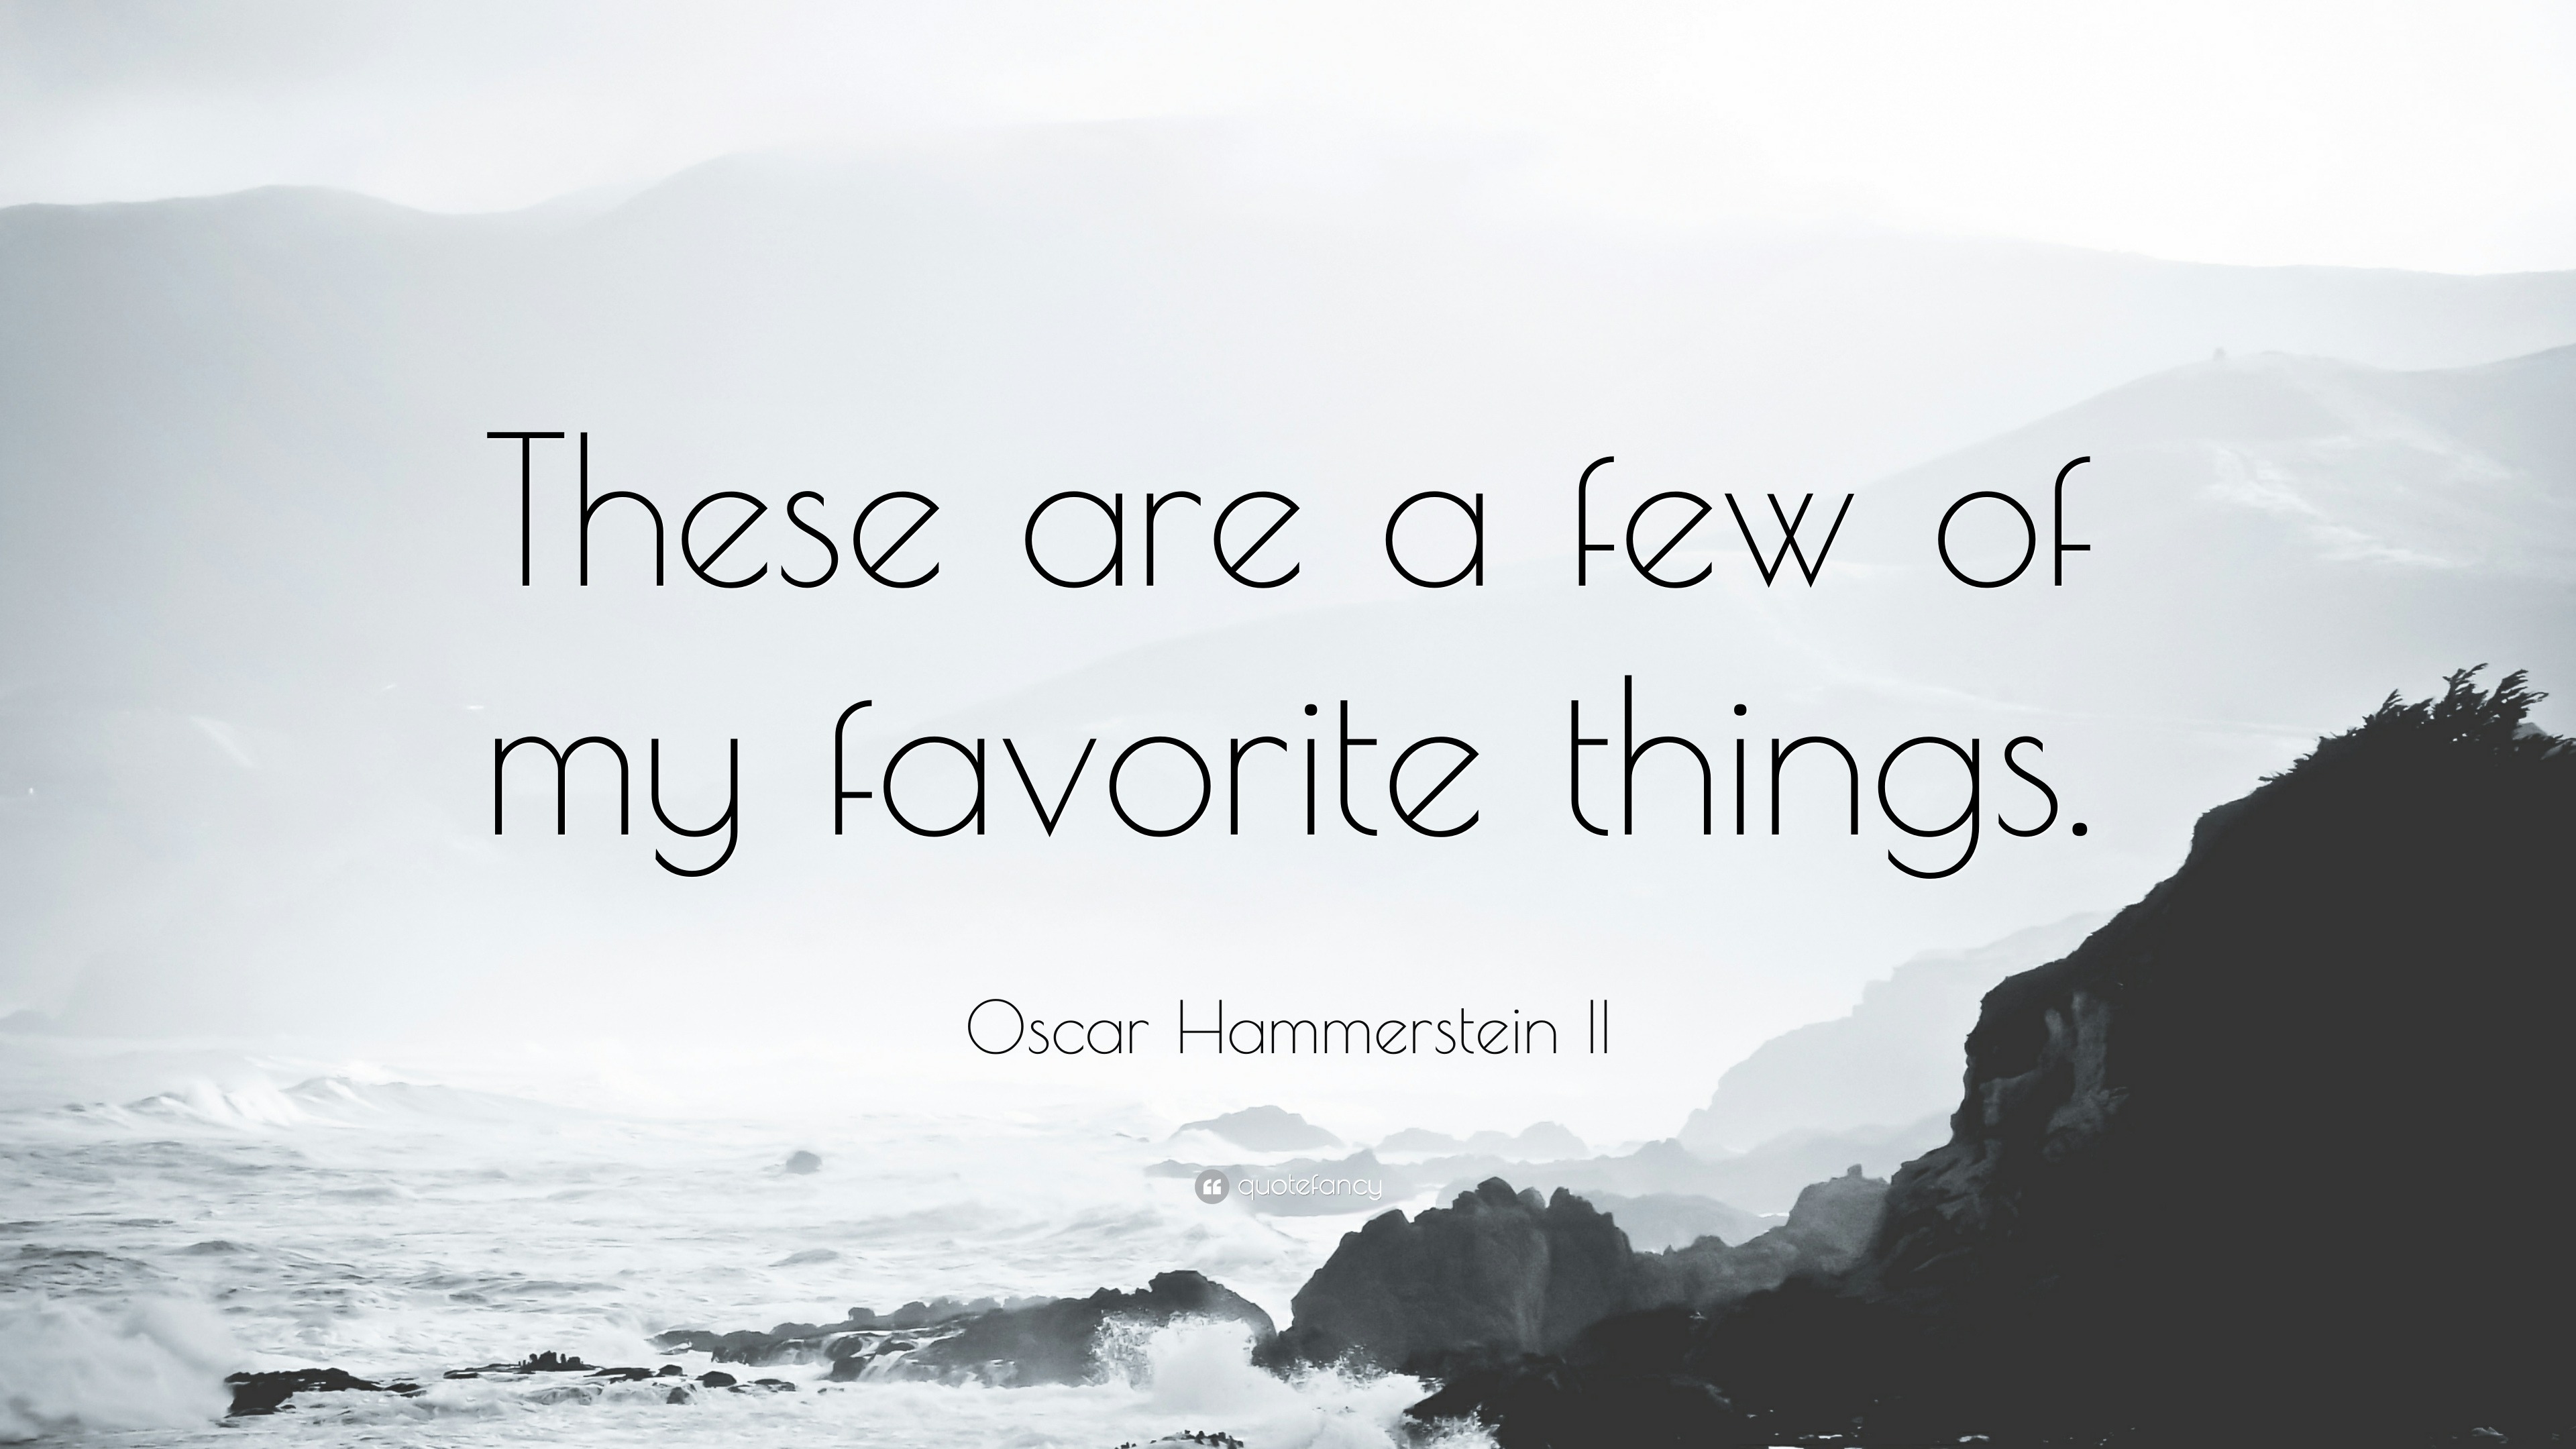 https://quotefancy.com/media/wallpaper/3840x2160/5488780-Oscar-Hammerstein-II-Quote-These-are-a-few-of-my-favorite-things.jpg